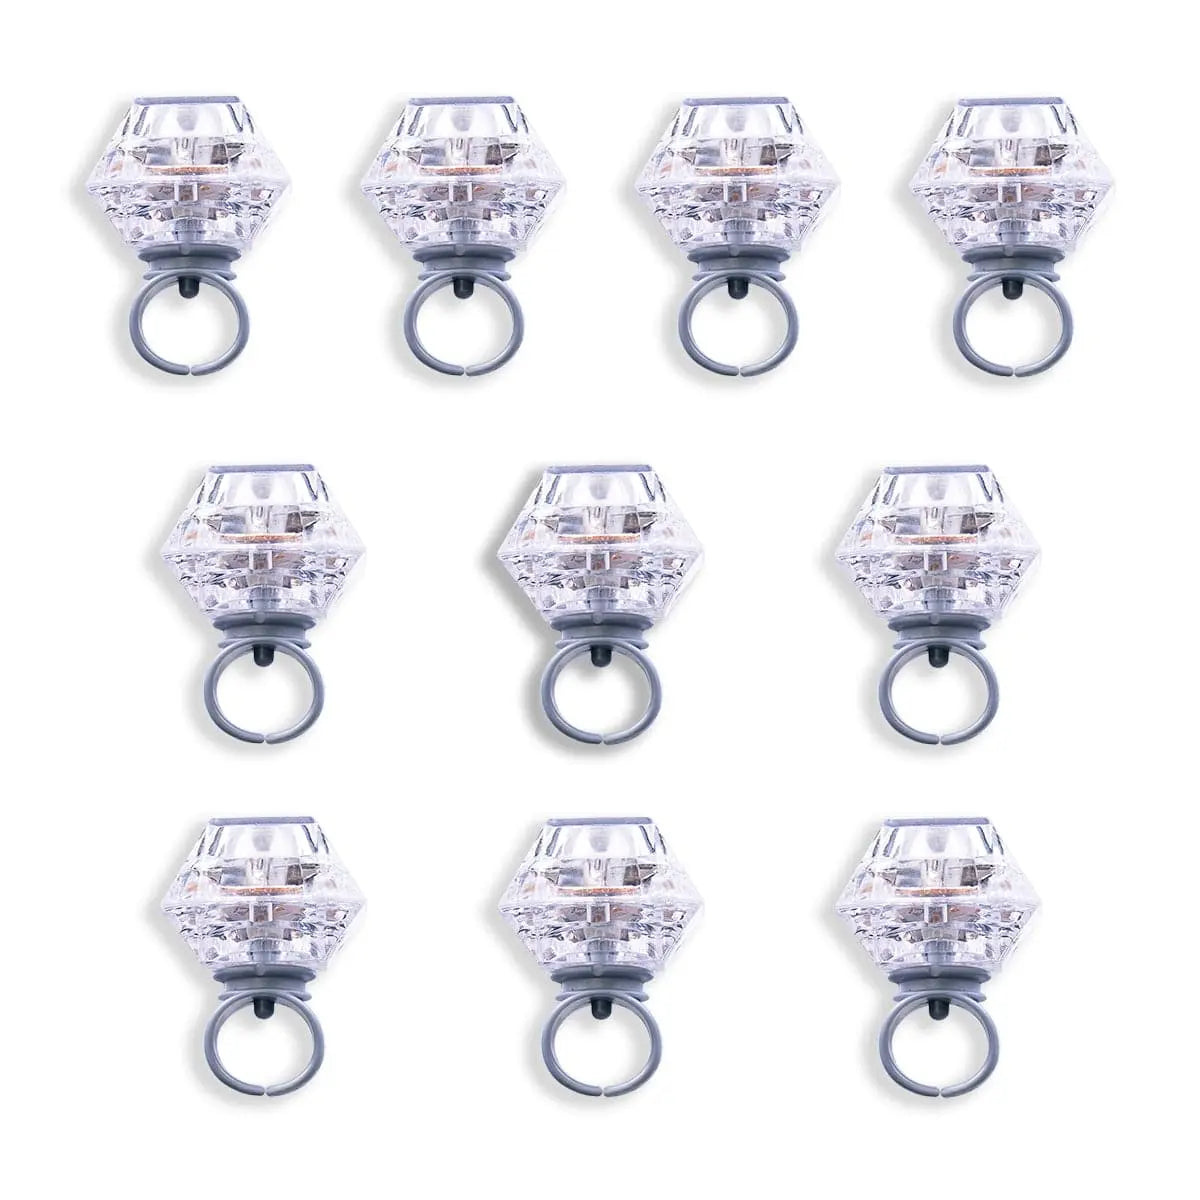 Set of 10 LED Diamond Light Up Rings - Retro Toys, Party Favors, Bachelorette Party Decorations, Bachelorette Party Favors, Bachelorette Party Supplies, Flashing LED Light Up Toy - Mrs... At Last!